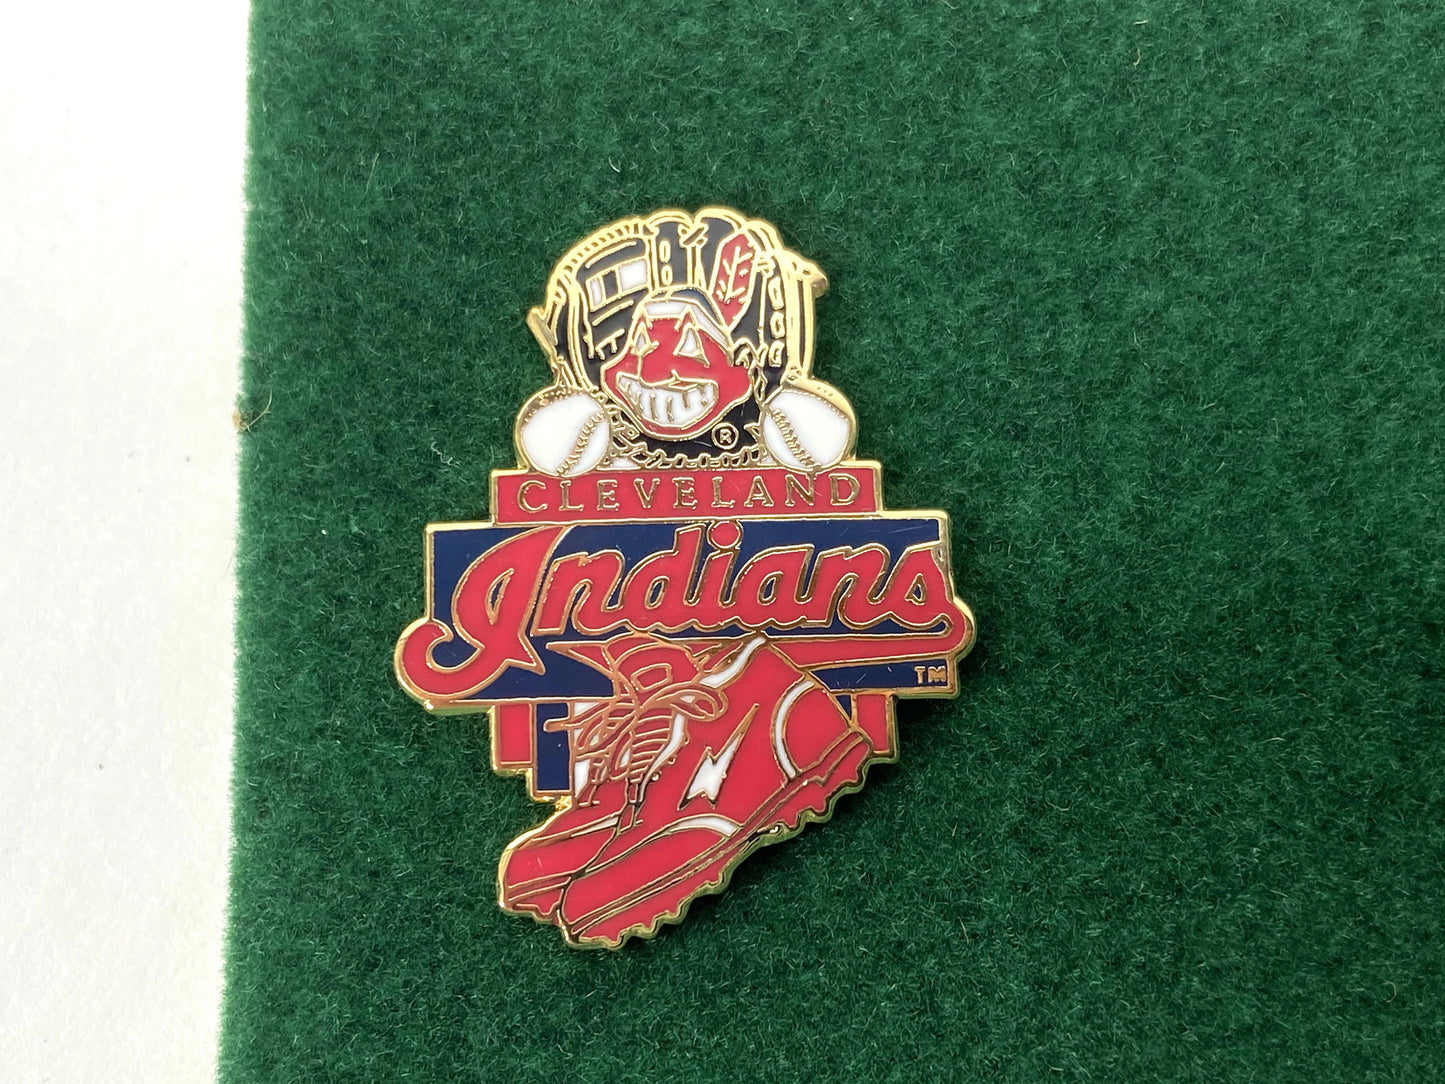 Cleveland Indians Vintage MLB 5-Piece Pin Set by Peter David